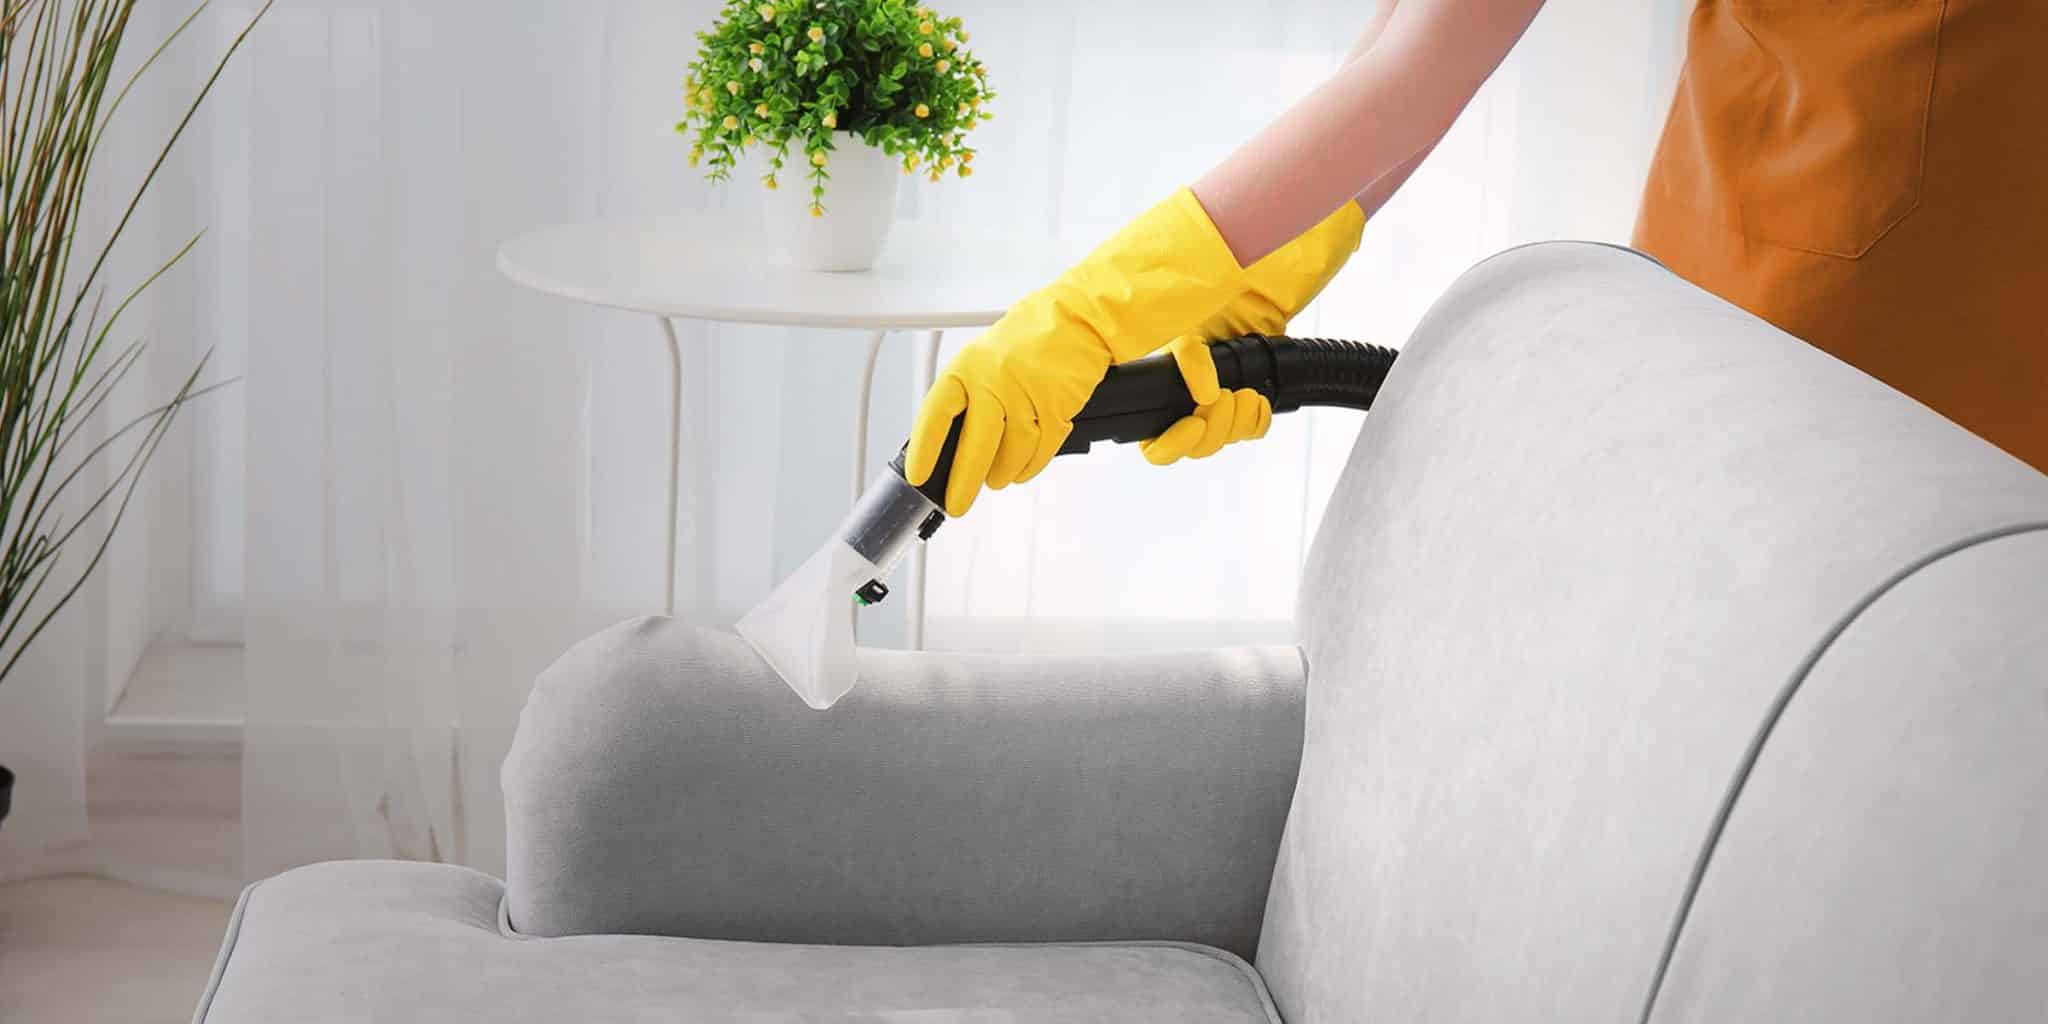 How to Clean a Fabric Sofa Effectively?